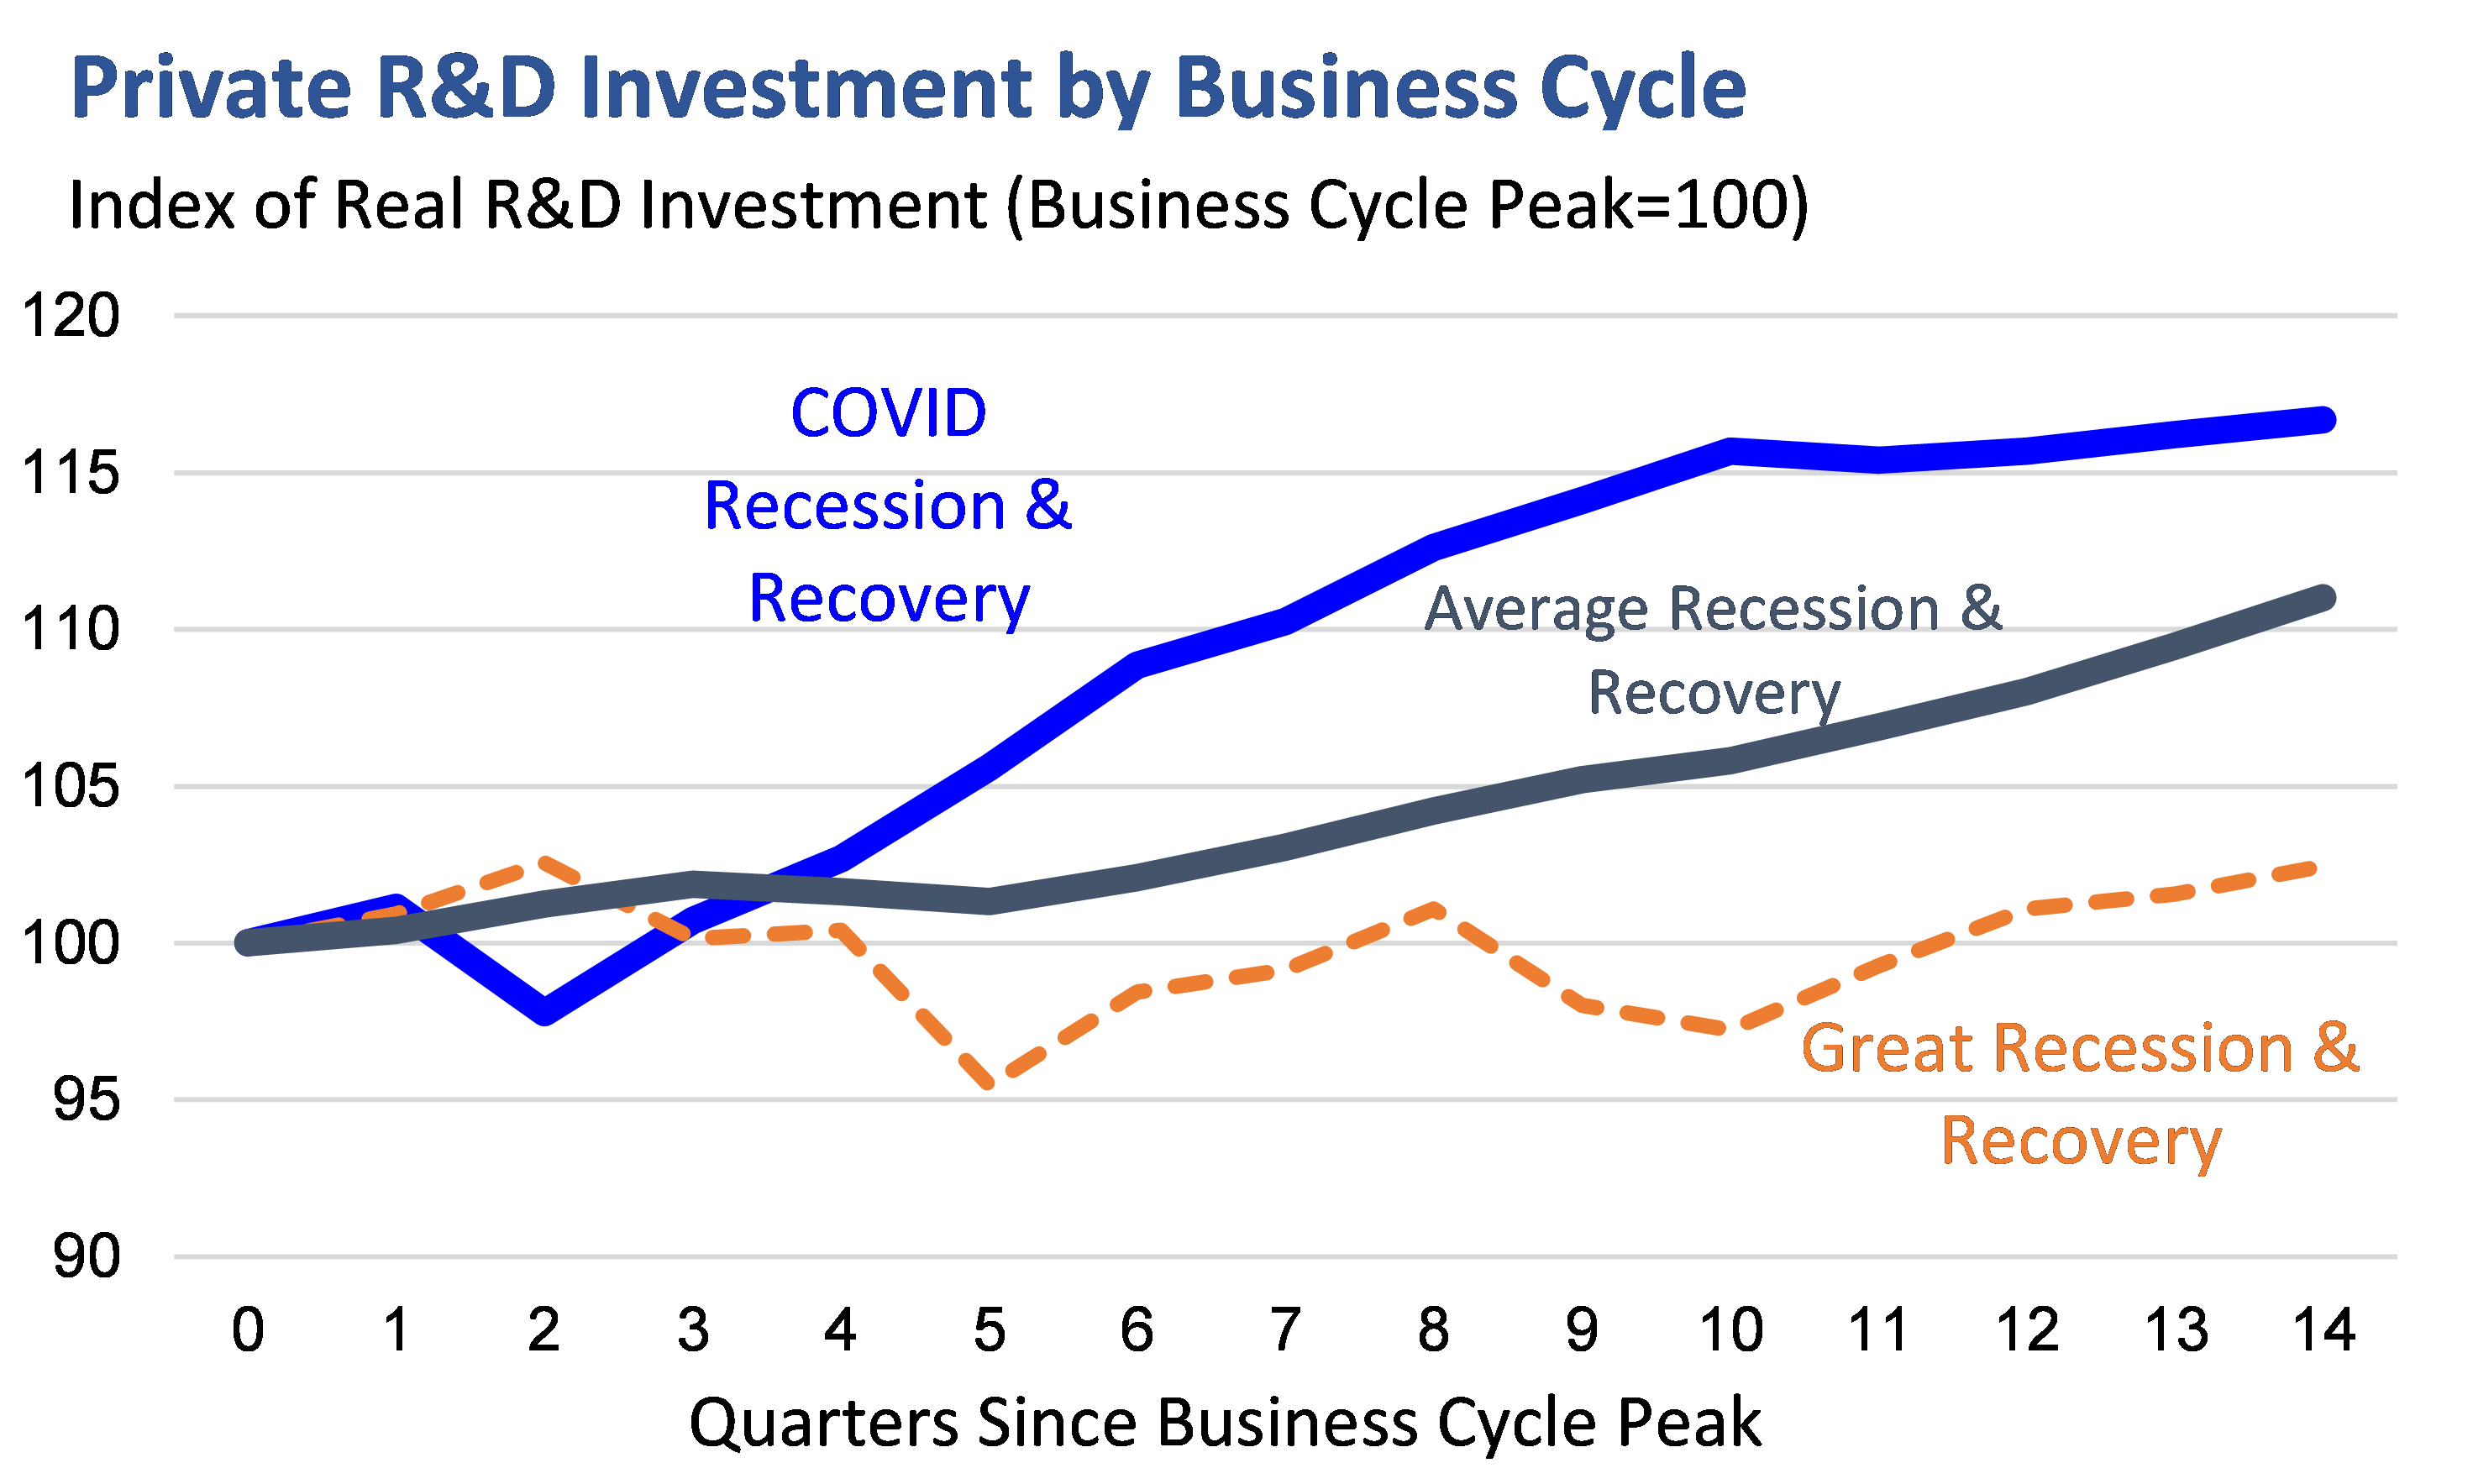 •	FIGURE 2: Private R&D Investment by Business Cycle